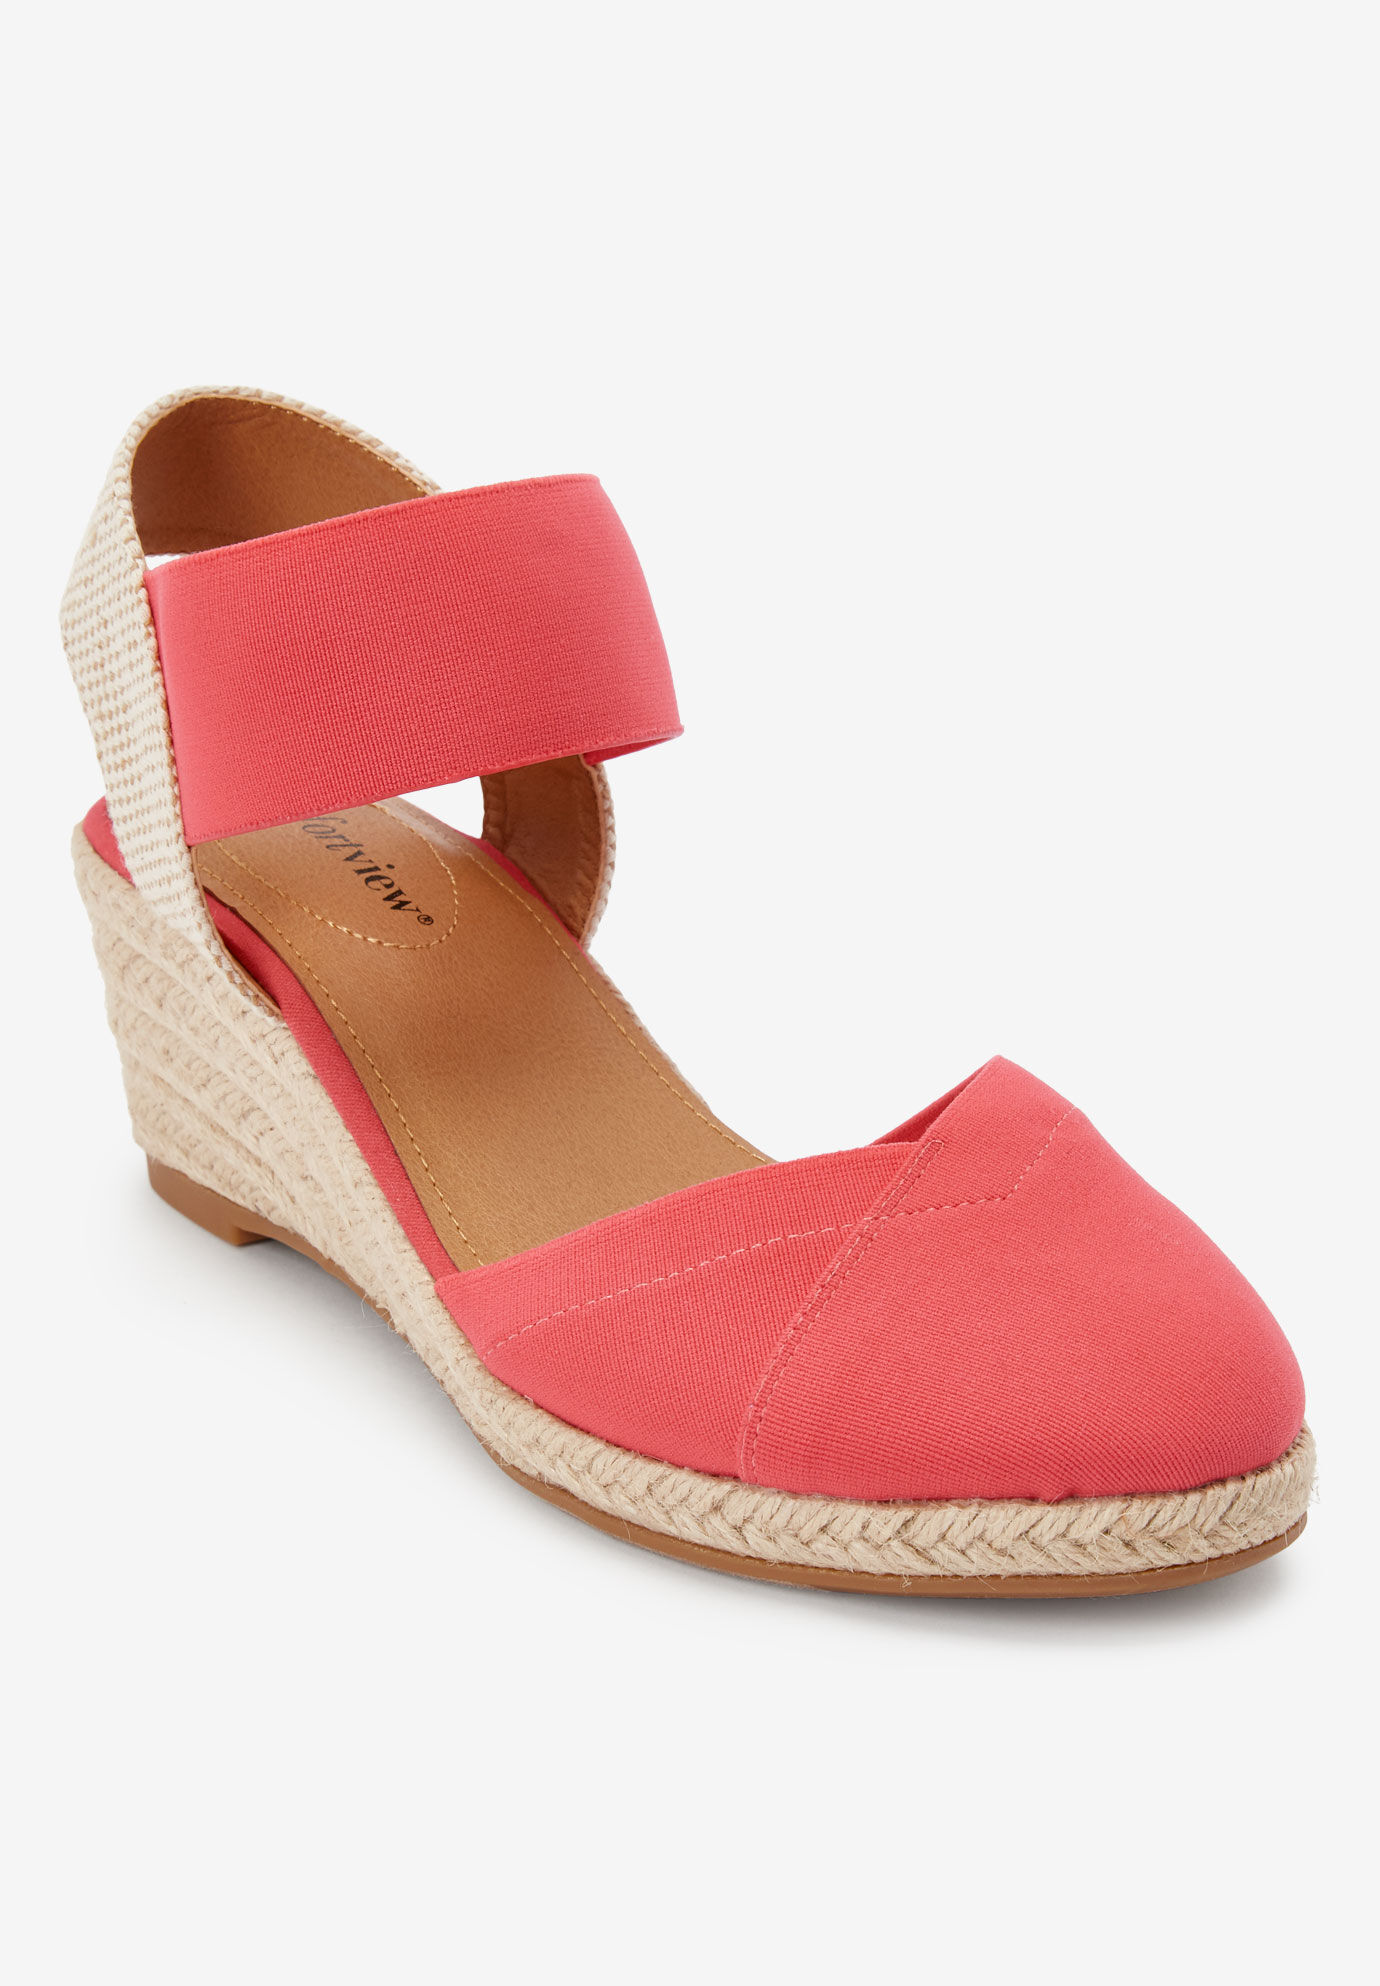 Women's Clearance Shoes | Jessica London